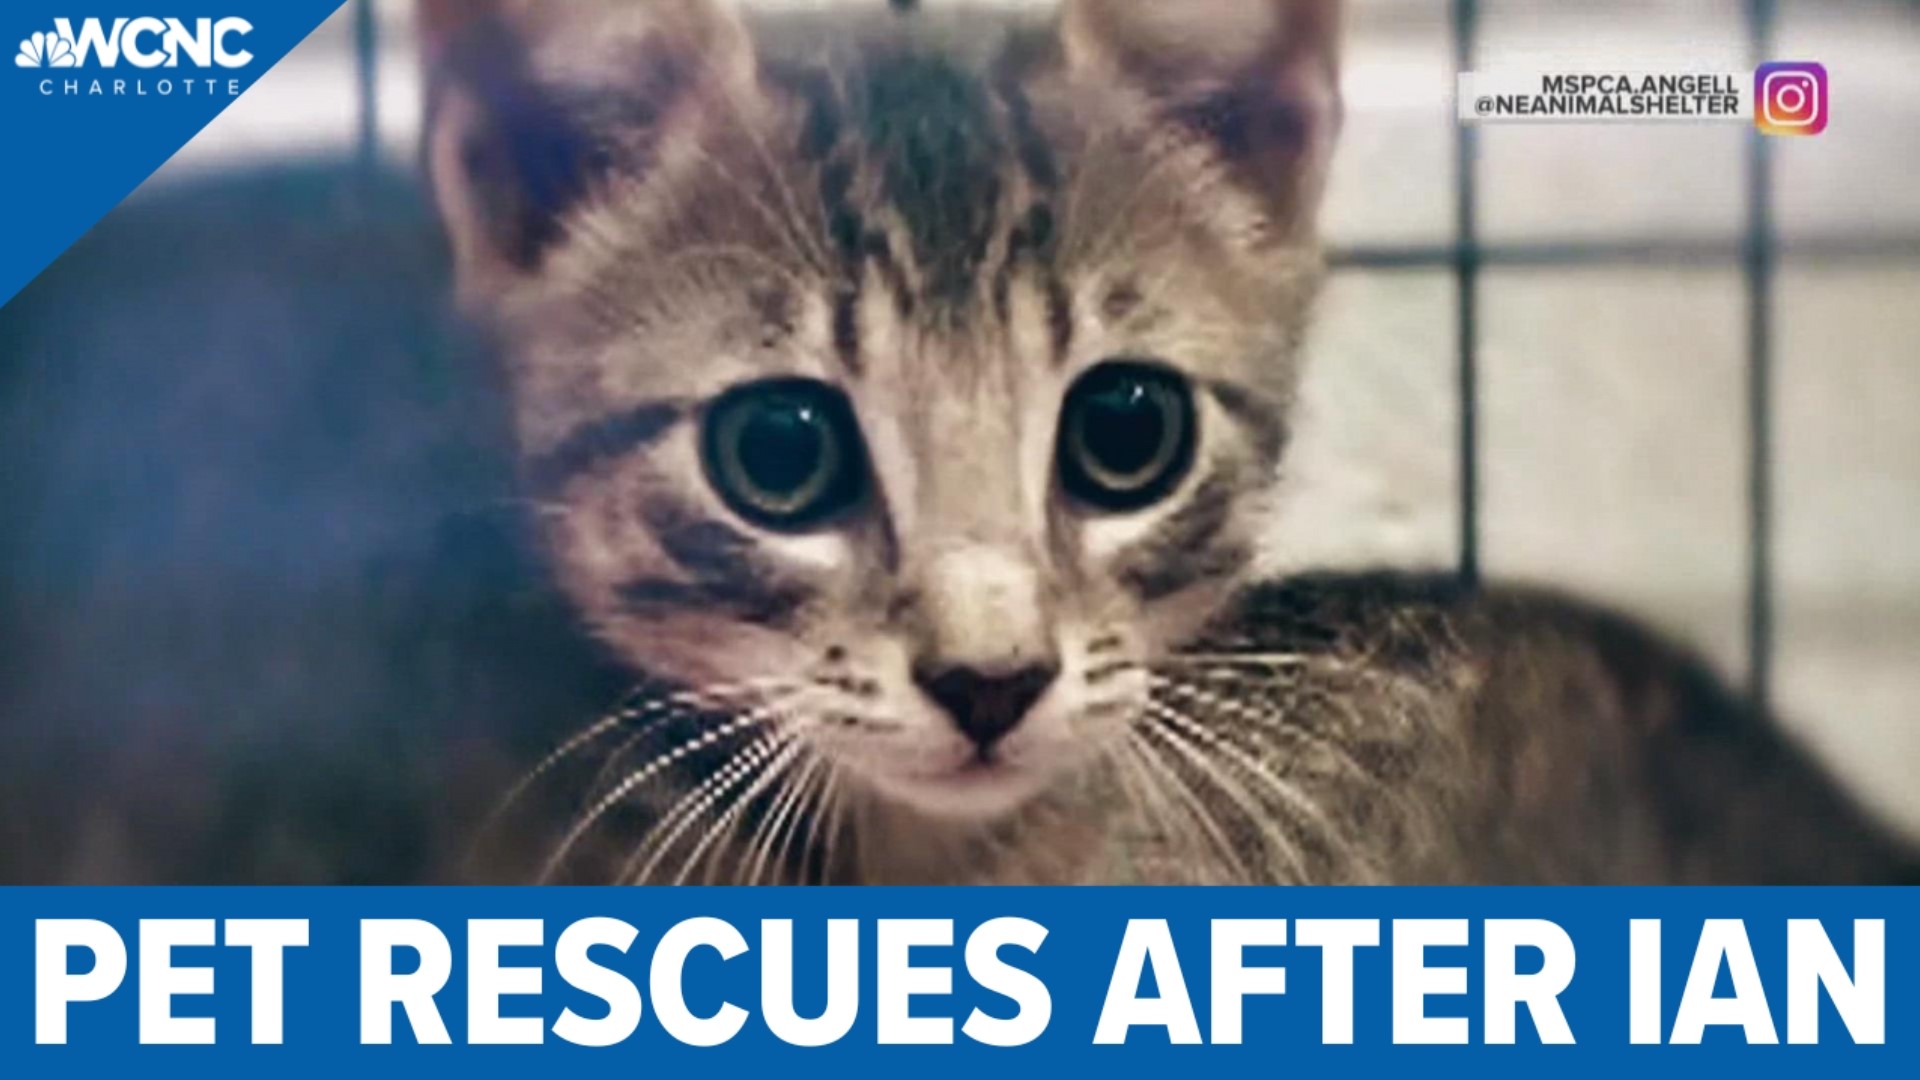 Animal shelters are working together to quickly help pets impacted by the hurricane.